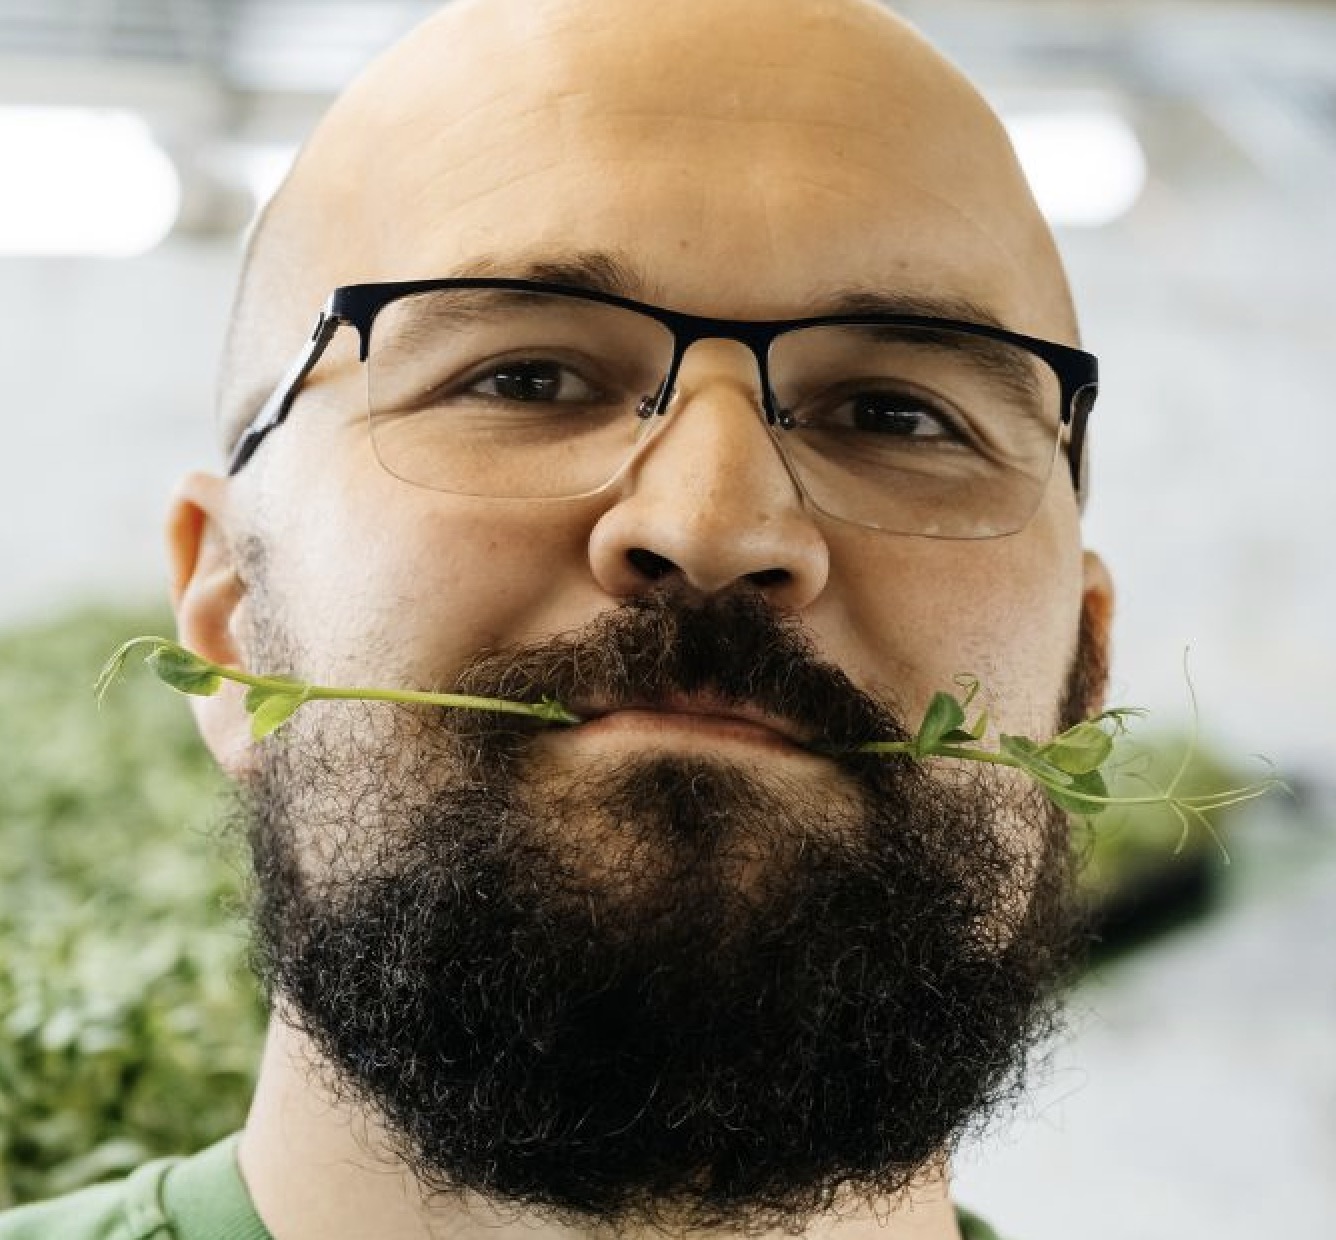 Meet oliver greenfield, a passionate microgreen enthusiast, with years of experience in growing and nurturing microgreens. He shares valuable insights, tips, and techniques to help you cultivate your own thriving microgreen garden. Dive in and learn from his hands-on expertise.